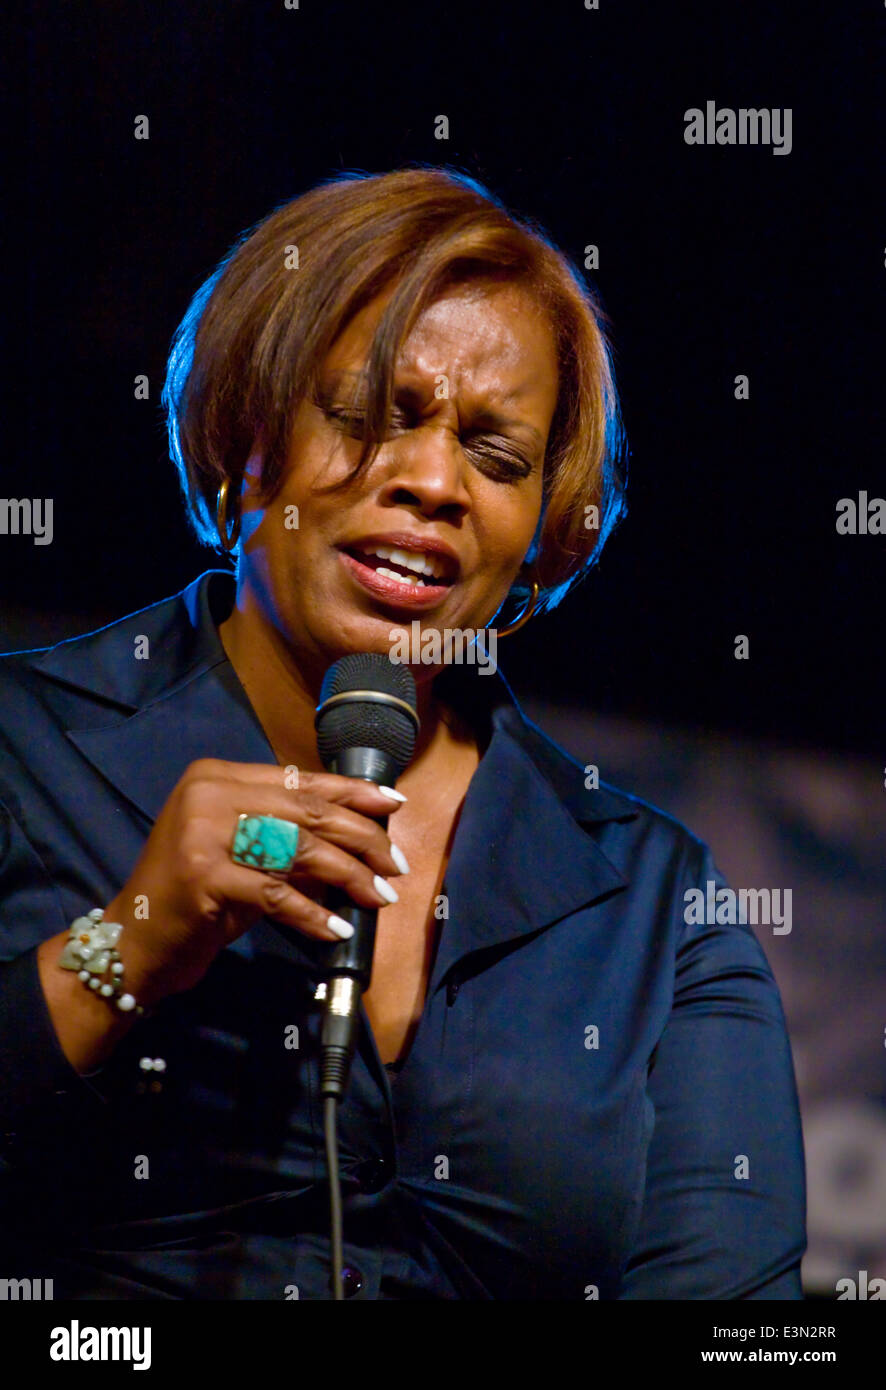 DIANNE REEVES sings at the Next Generation Jazz Festival - Monterey, California 2009 Stock Photo